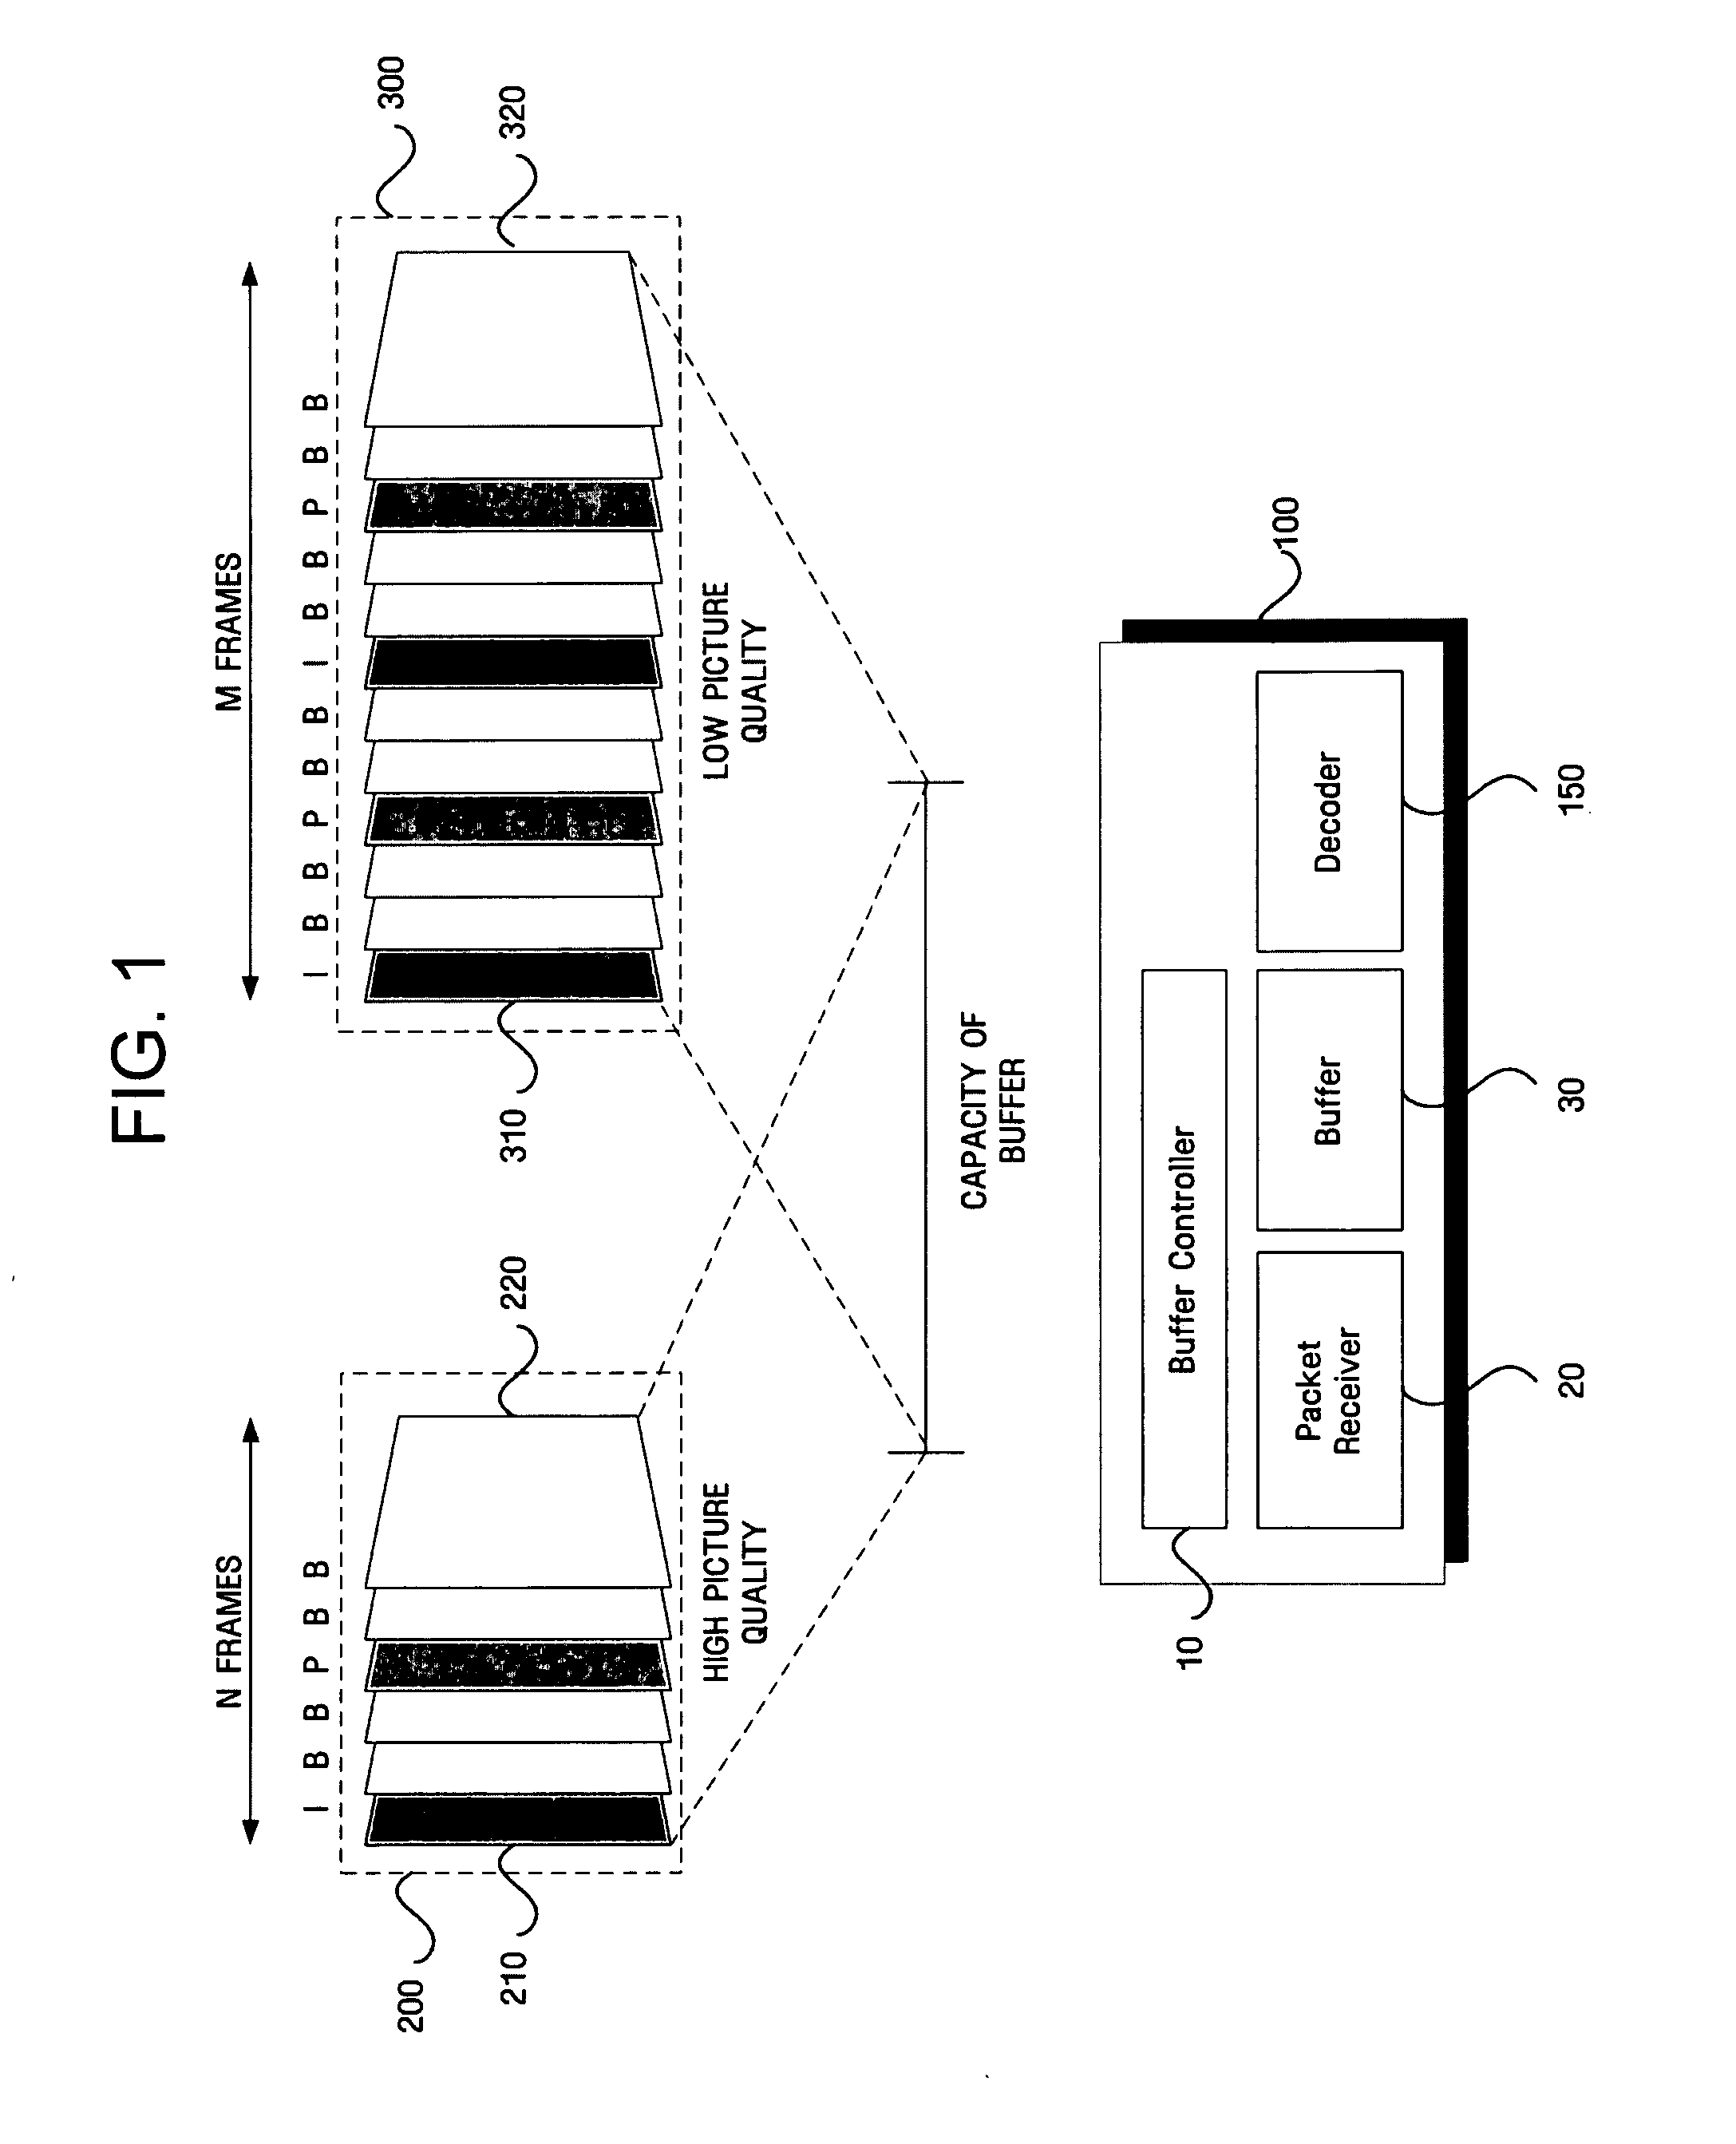 Apparatus and method for adaptively controlling buffering amount according to content attribute in receiving audio-video data